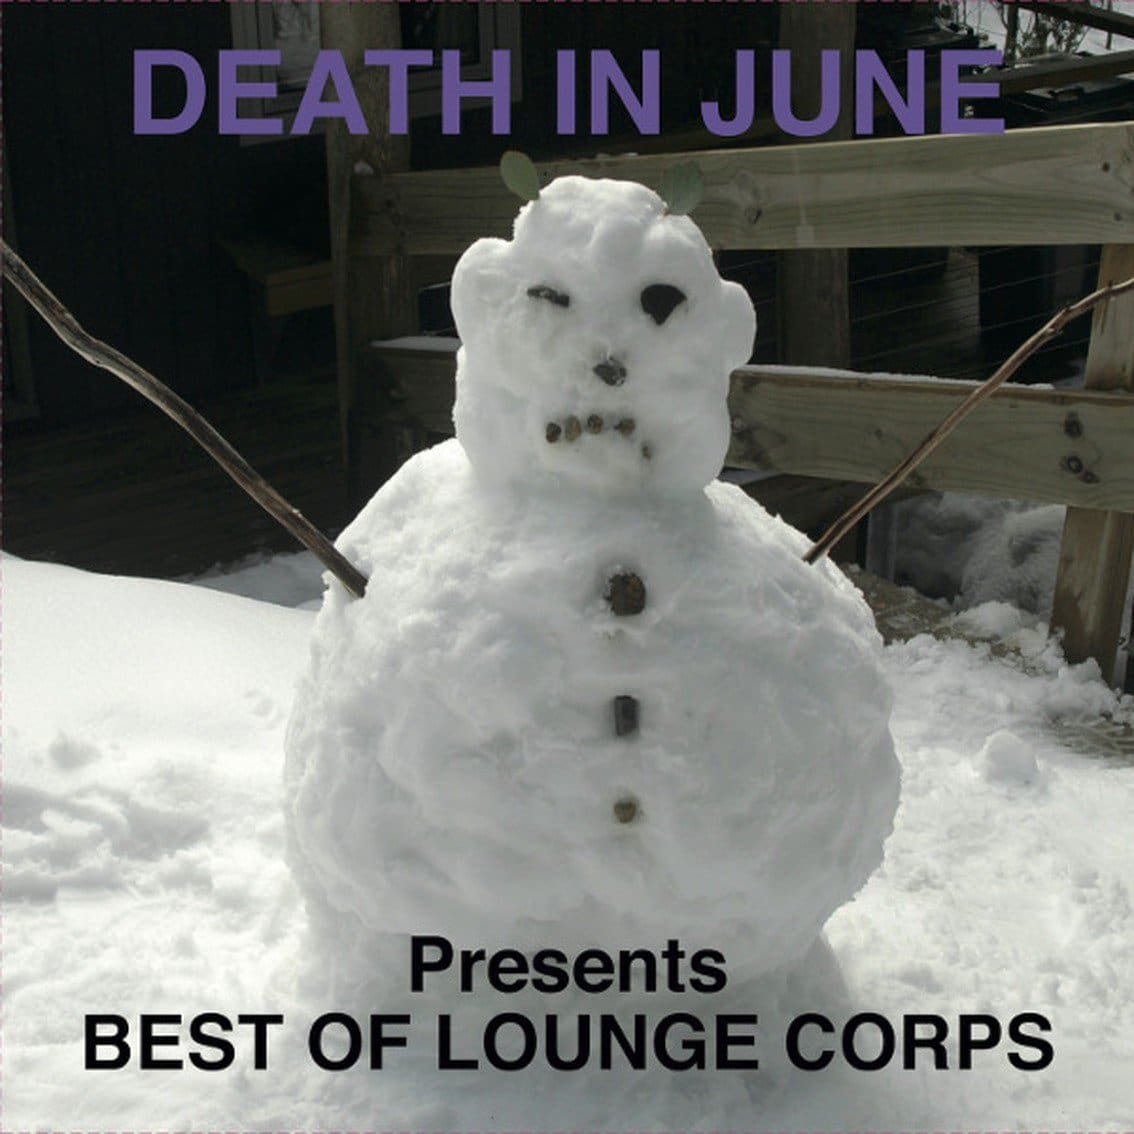 Death In June releases 'Best of lounge corps' on blue vinyl - order here